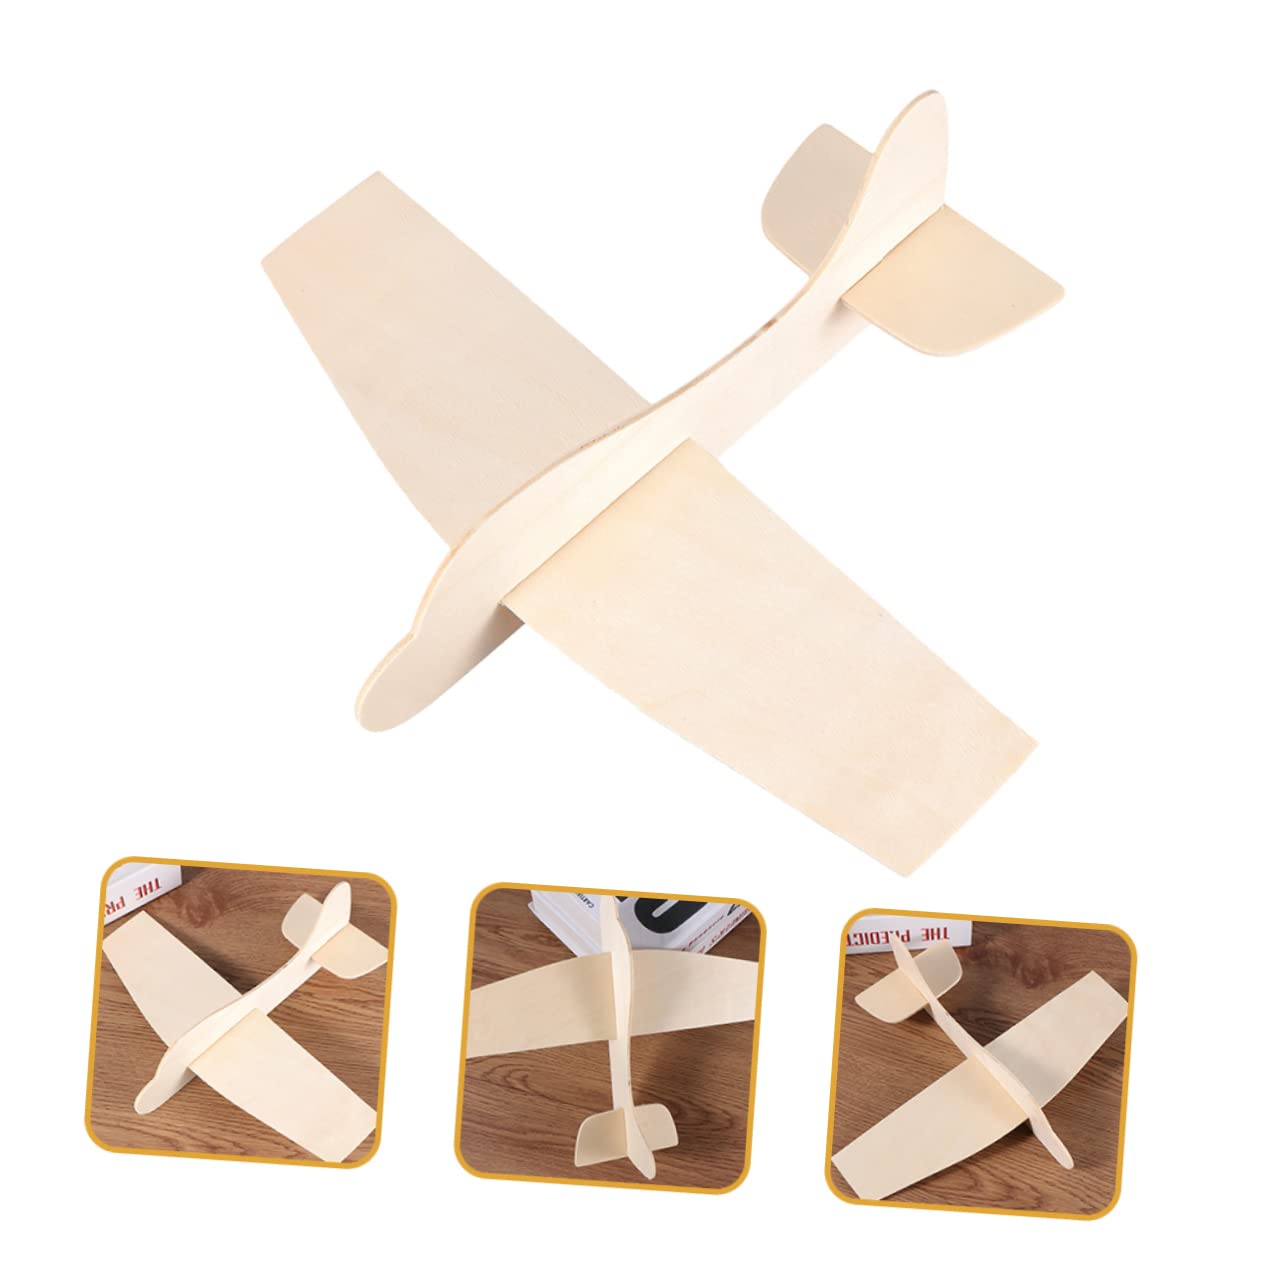 ERINGOGO 20pcs Blank Wood Aircraft Kid Toys Assembly Planes Wood Planes to Paint Kids Toys in Bulk Planes for Kids Balsa Wood Airplane Kits 3D Puzzles Child Skeleton Accessories